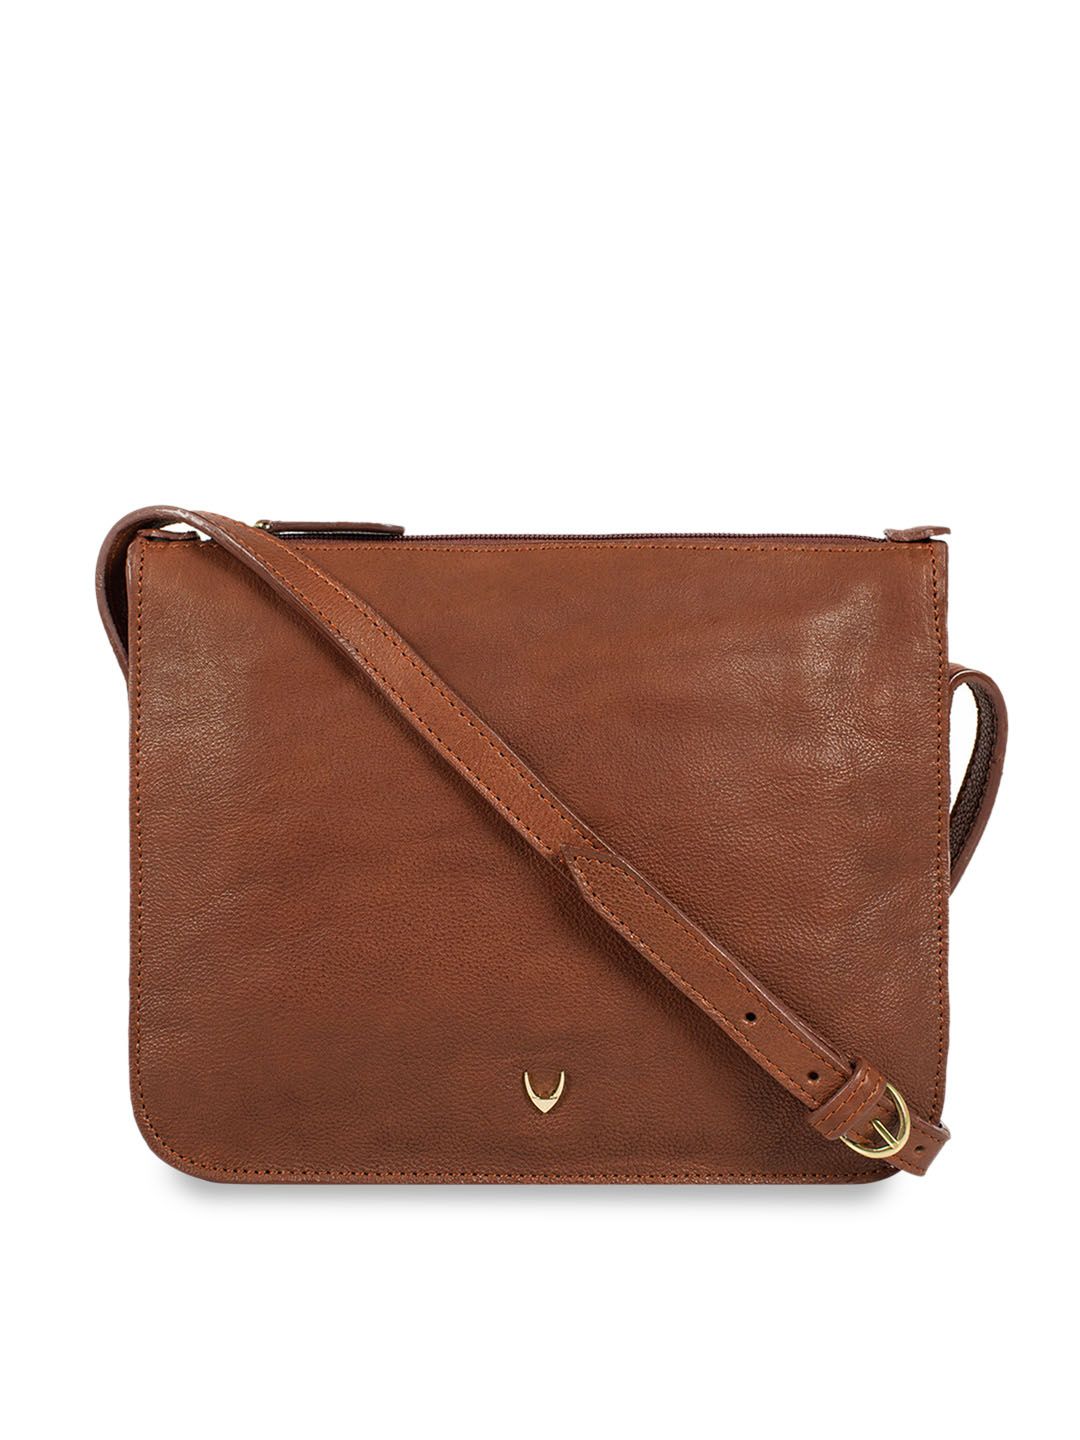 Hidesign Tan Brown Solid Leather Sling Bag Price in India